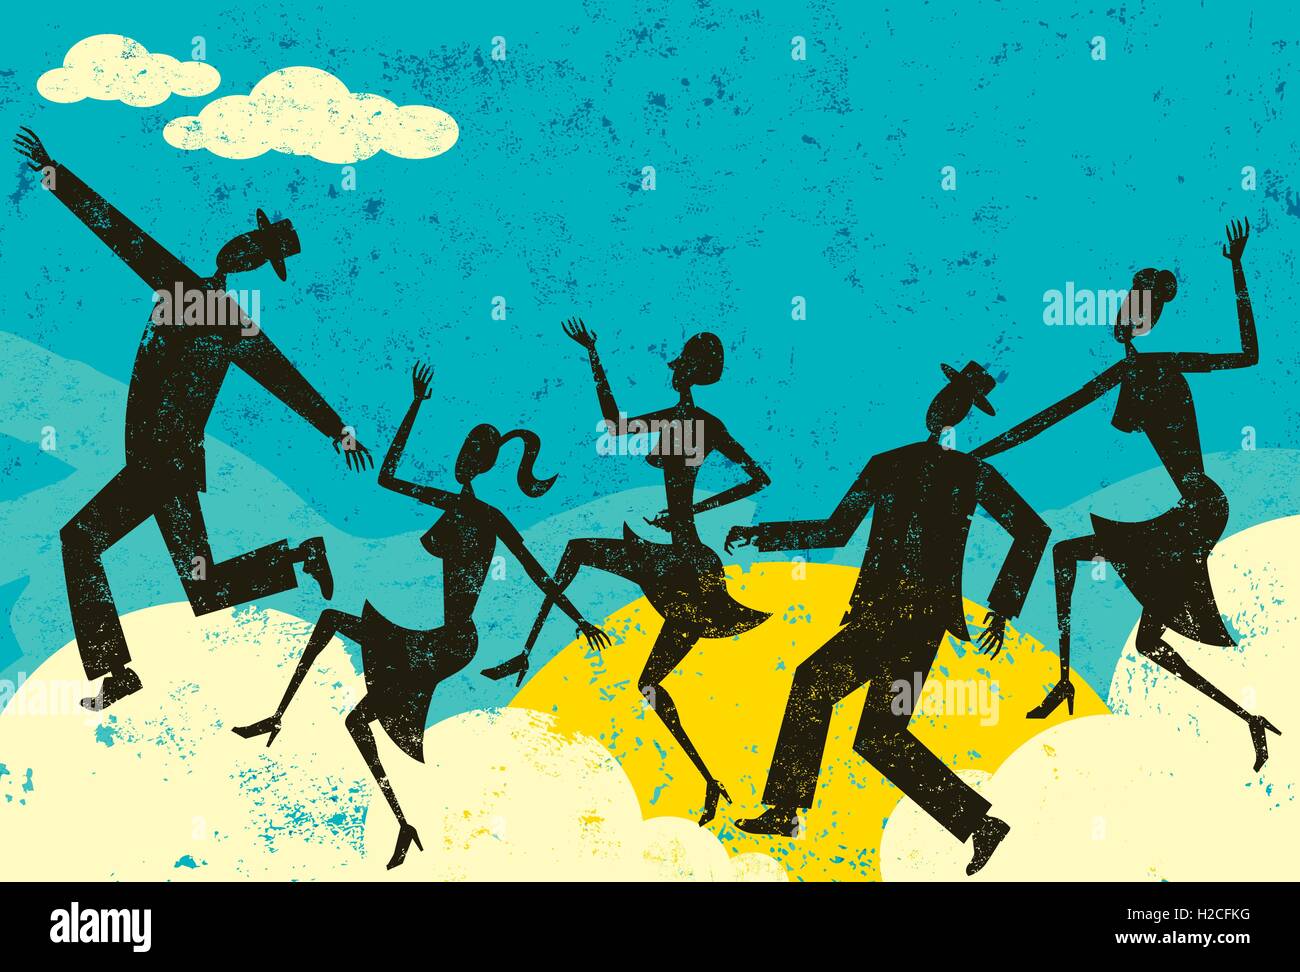 Cloud Dancers People in silhouette dancing on clouds over sunny abstract sky. The people and background are on separate labeled Stock Vector